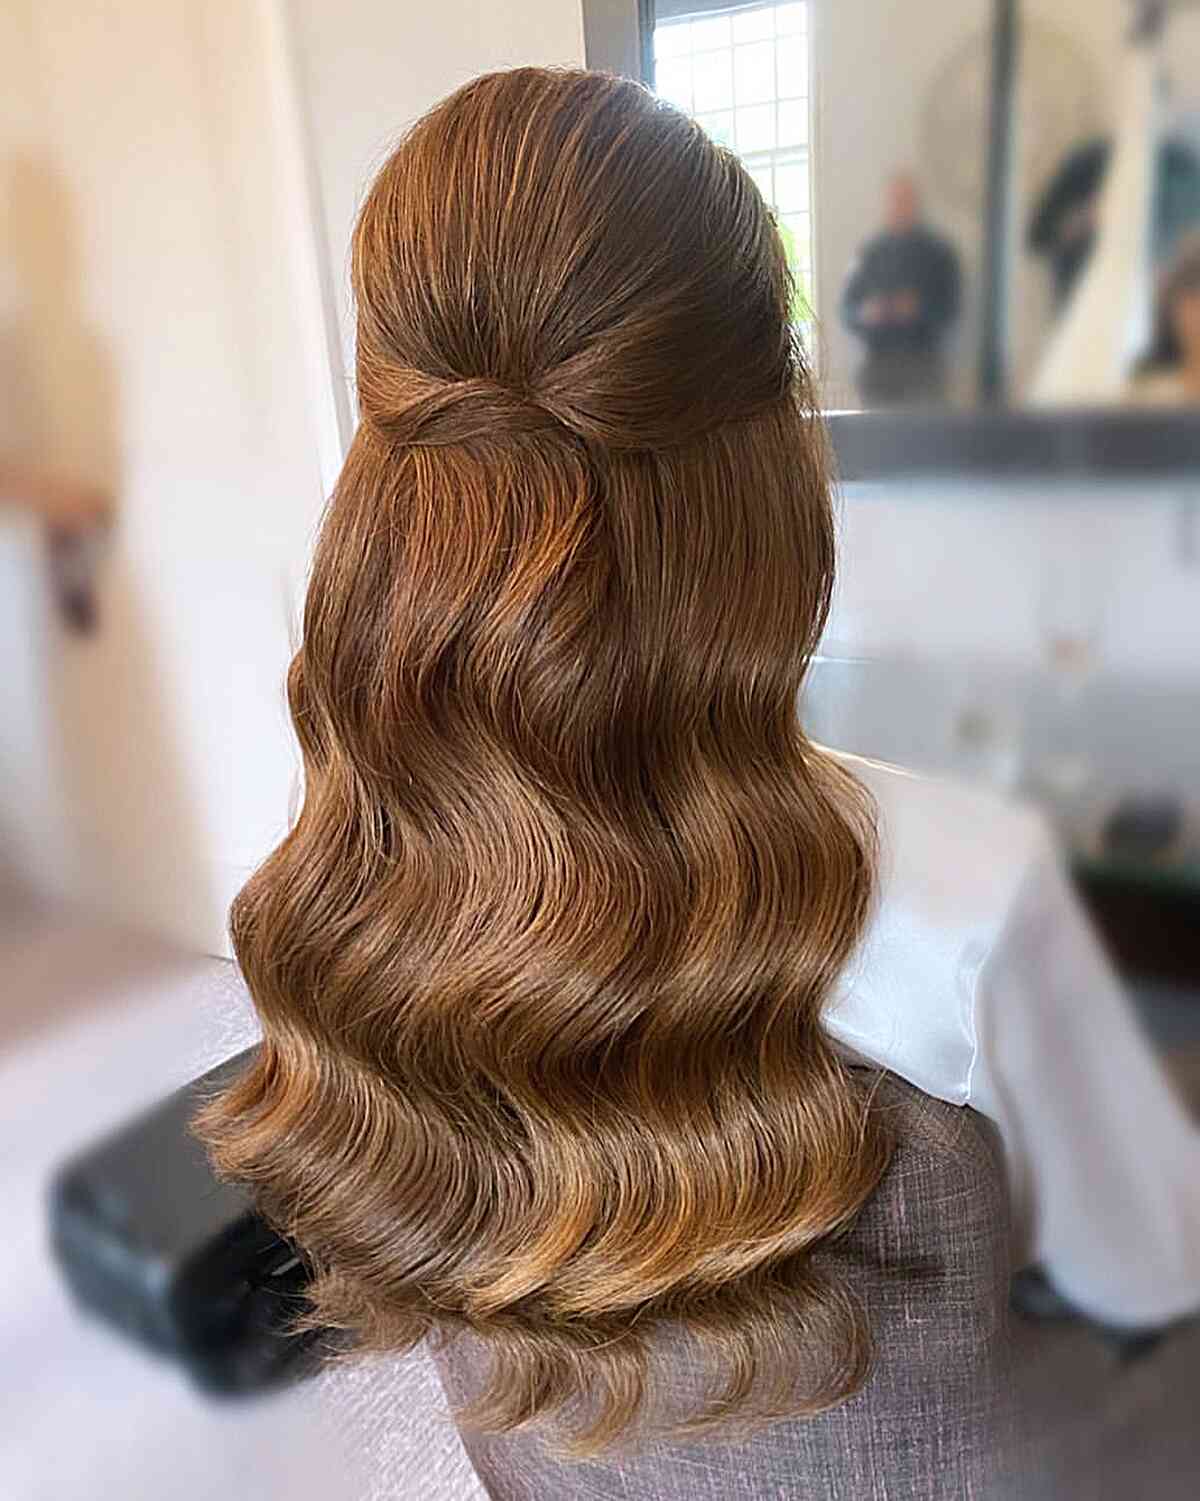 Long Half Up with Hollywood Waves for Wedding Attendees